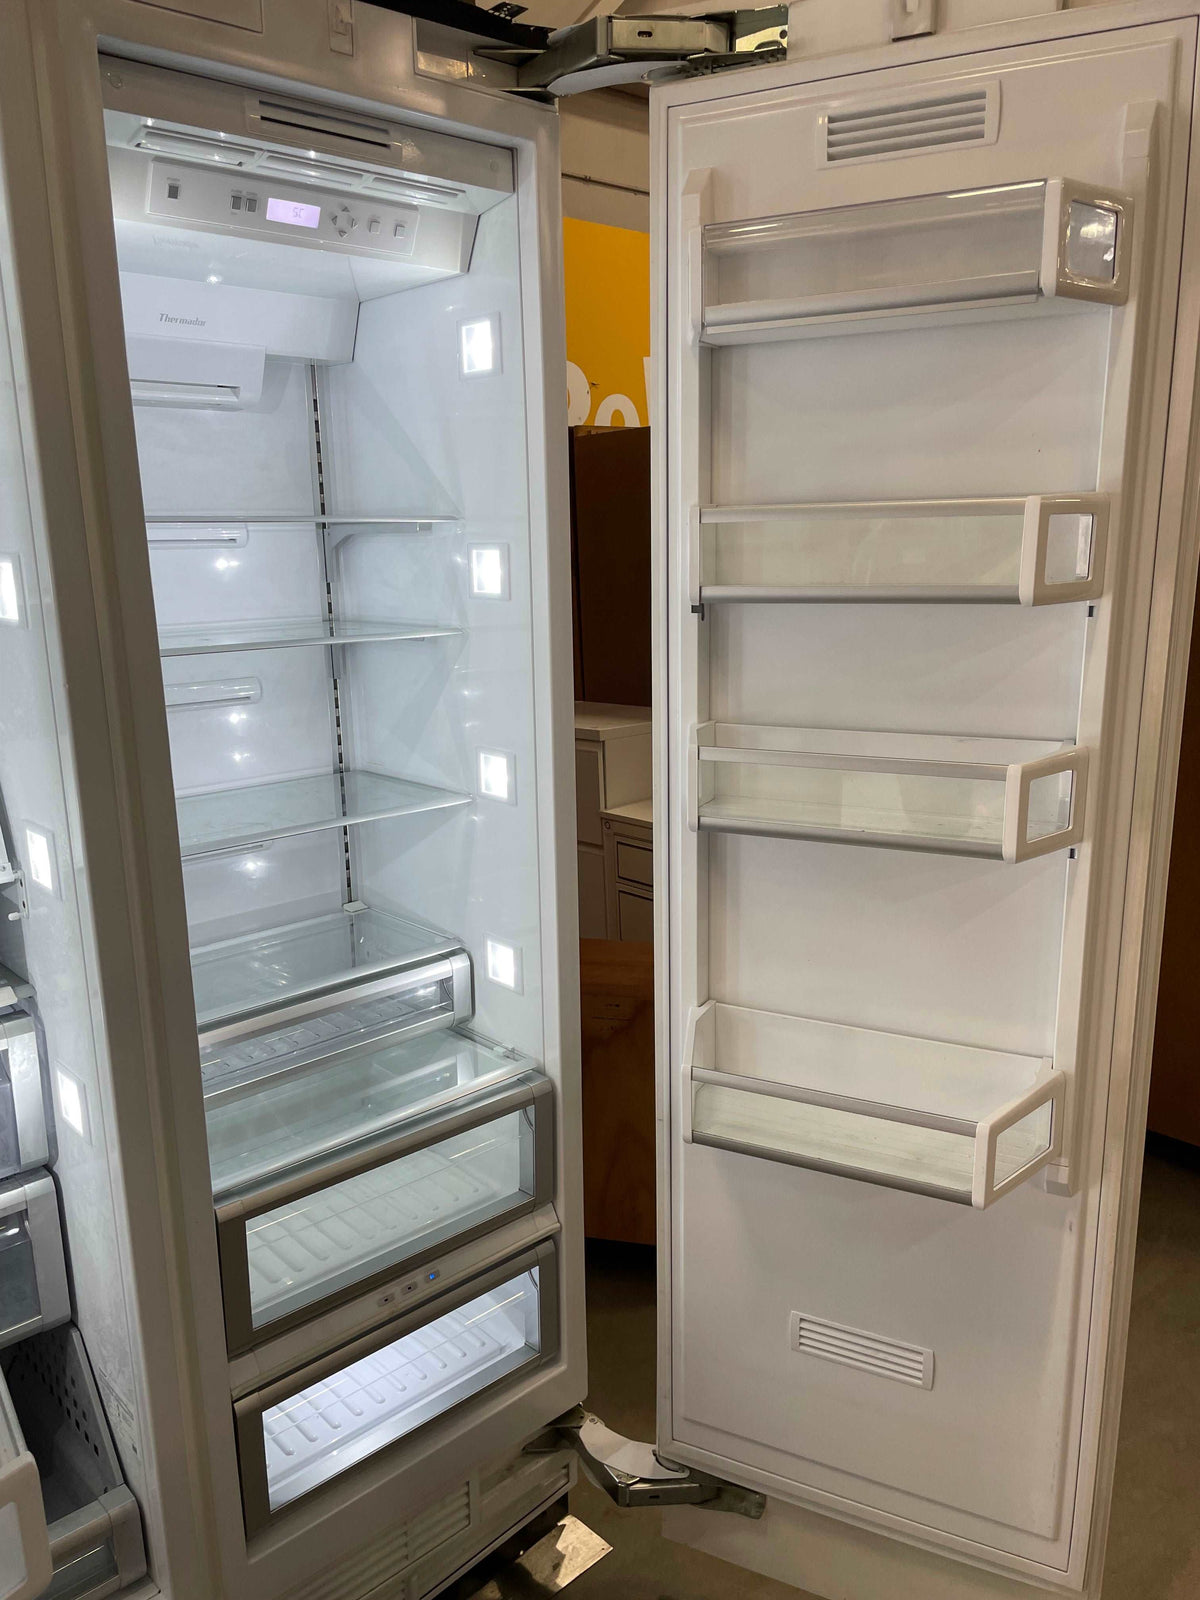 Thermador Side-by-Side Built-In Refrigerator Freezer